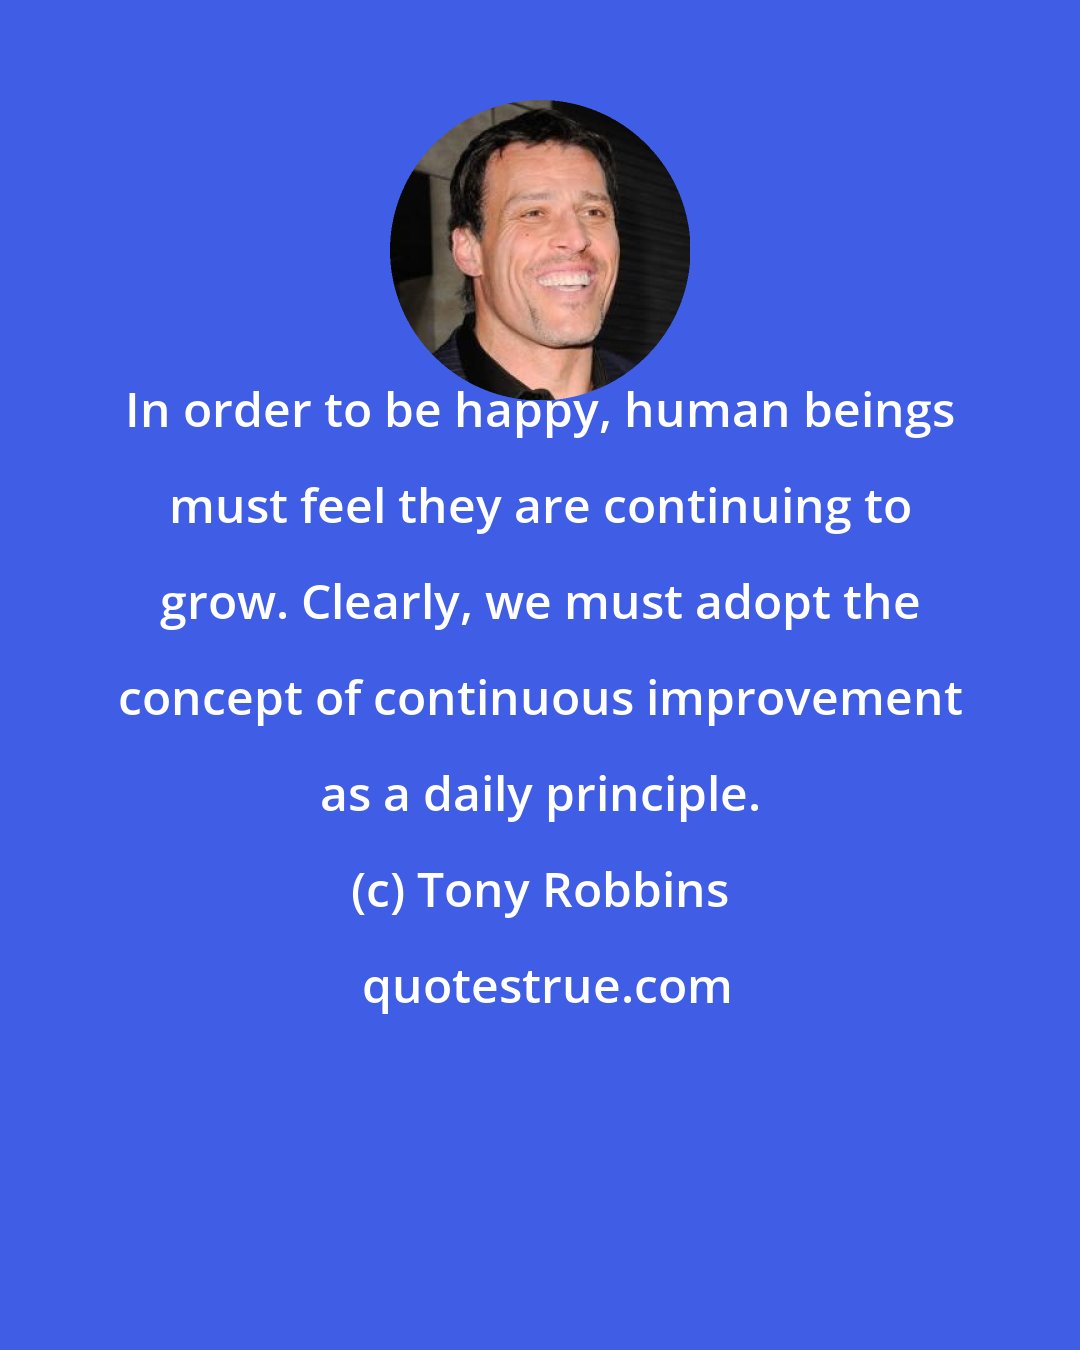 Tony Robbins: In order to be happy, human beings must feel they are continuing to grow. Clearly, we must adopt the concept of continuous improvement as a daily principle.